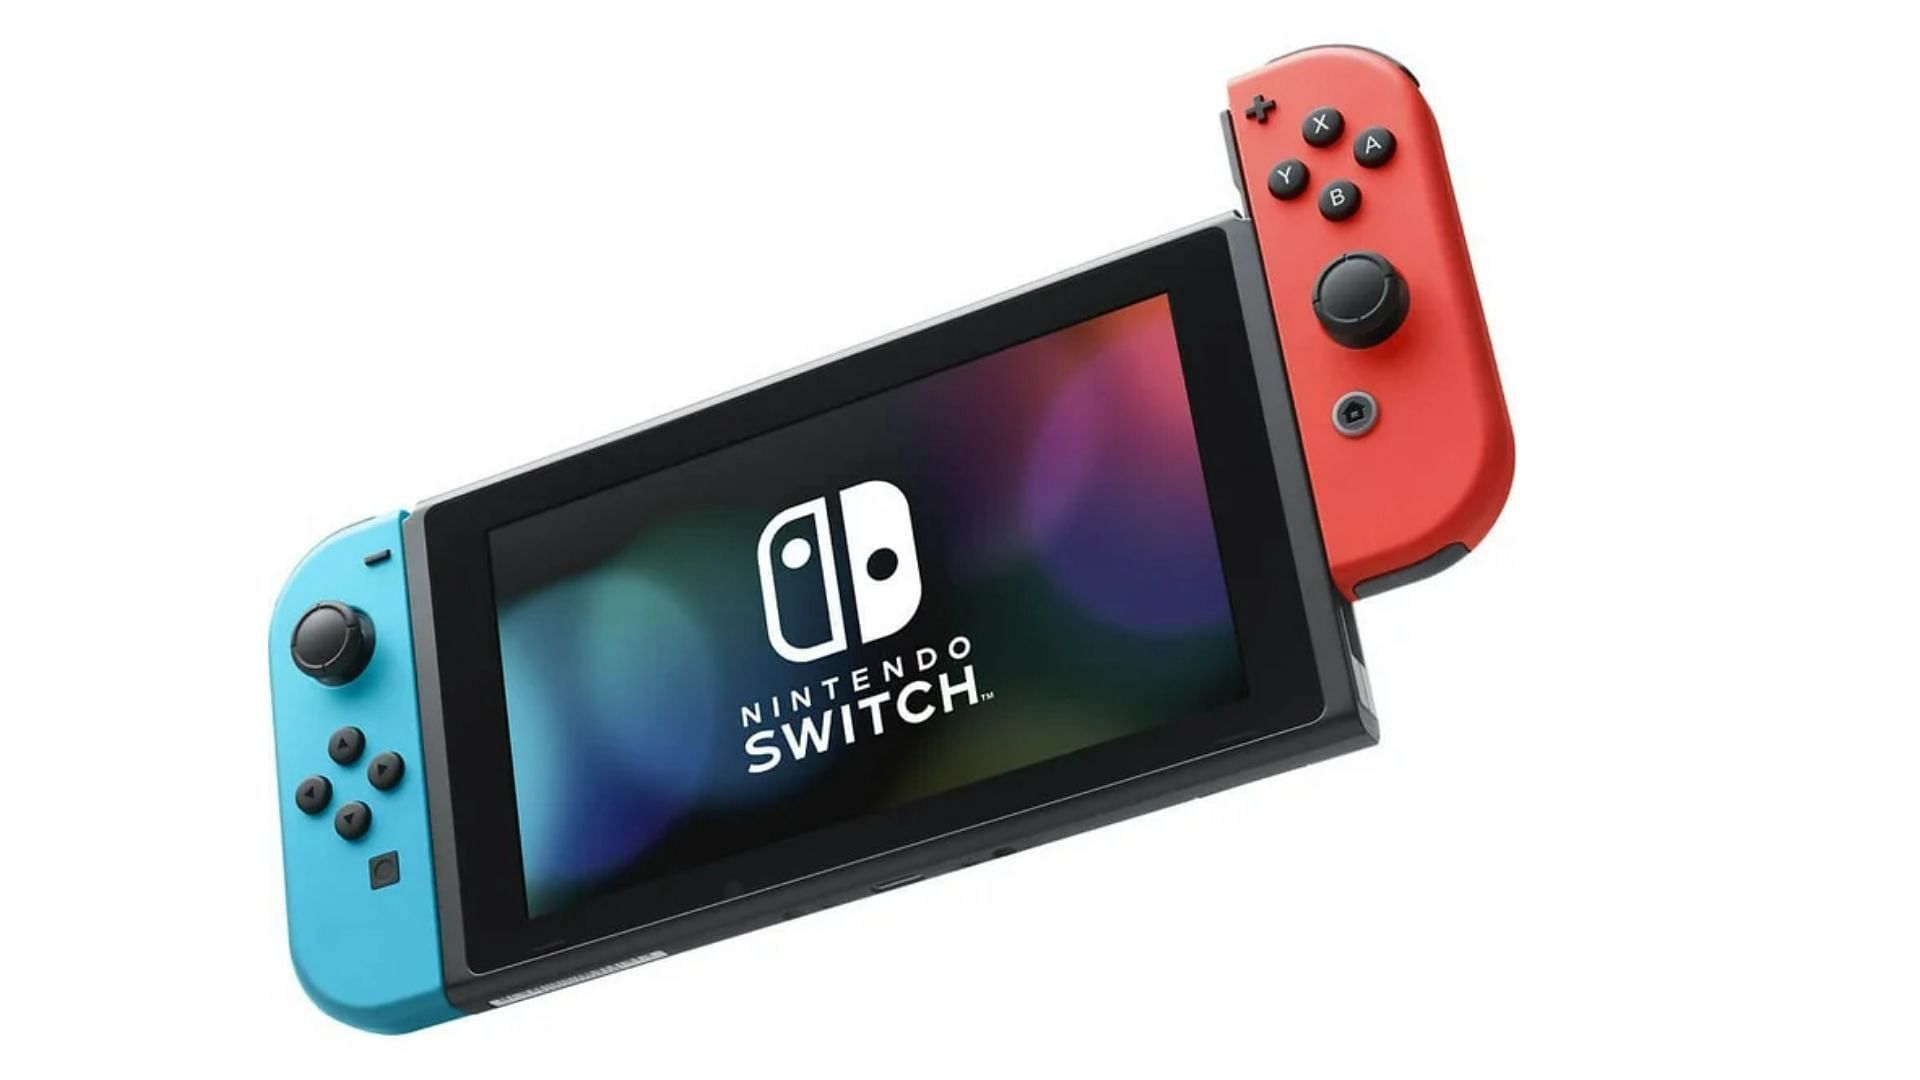 The Nintendo Switch 2 has been announced to launch this fiscal year (Image via Walmart)